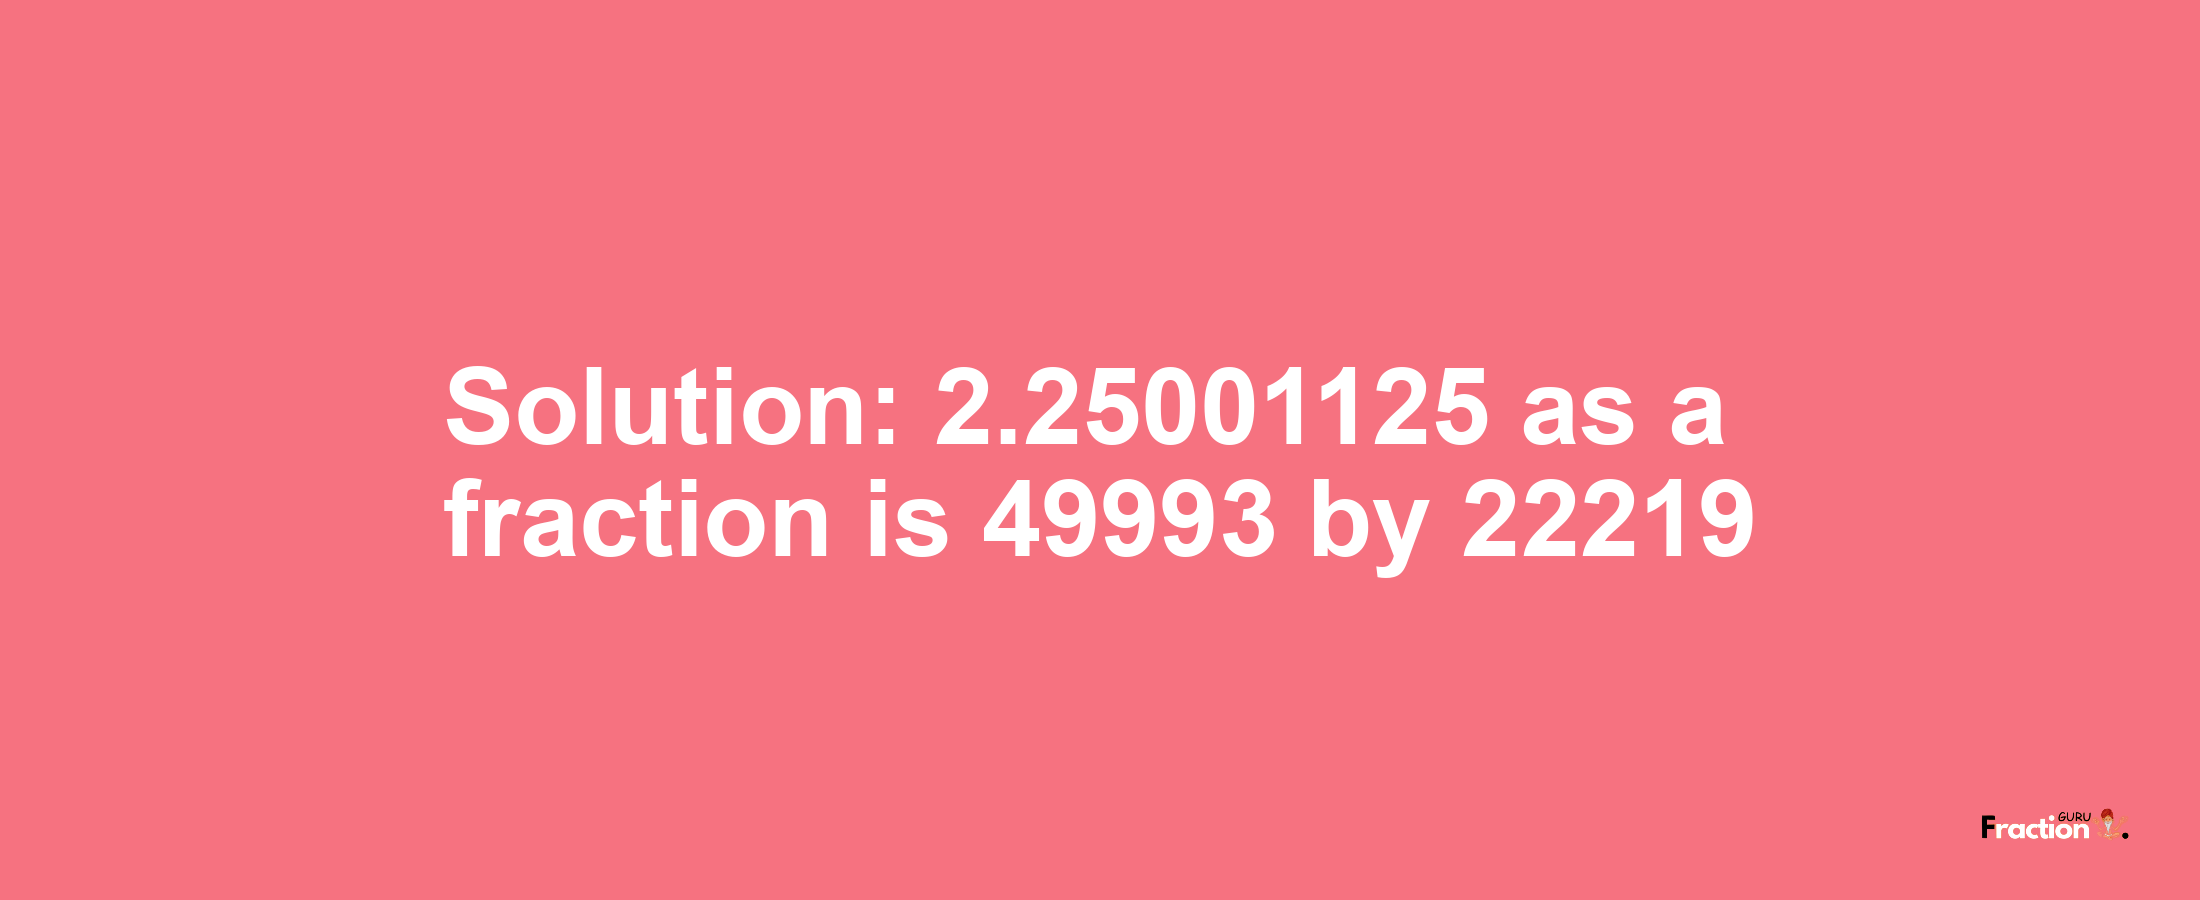 Solution:2.25001125 as a fraction is 49993/22219